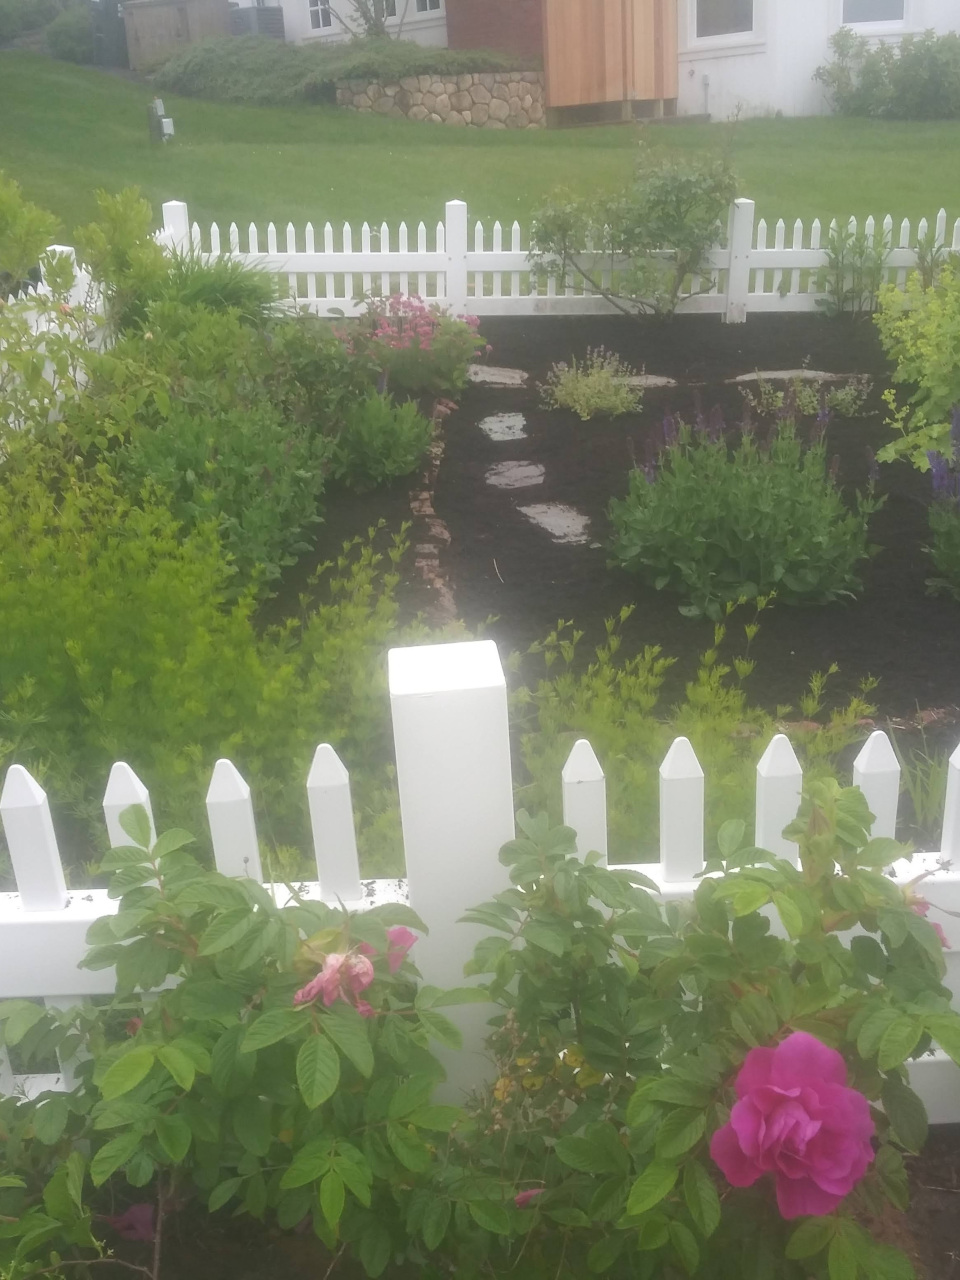 White fence with roses growing on it and garden with rock paths